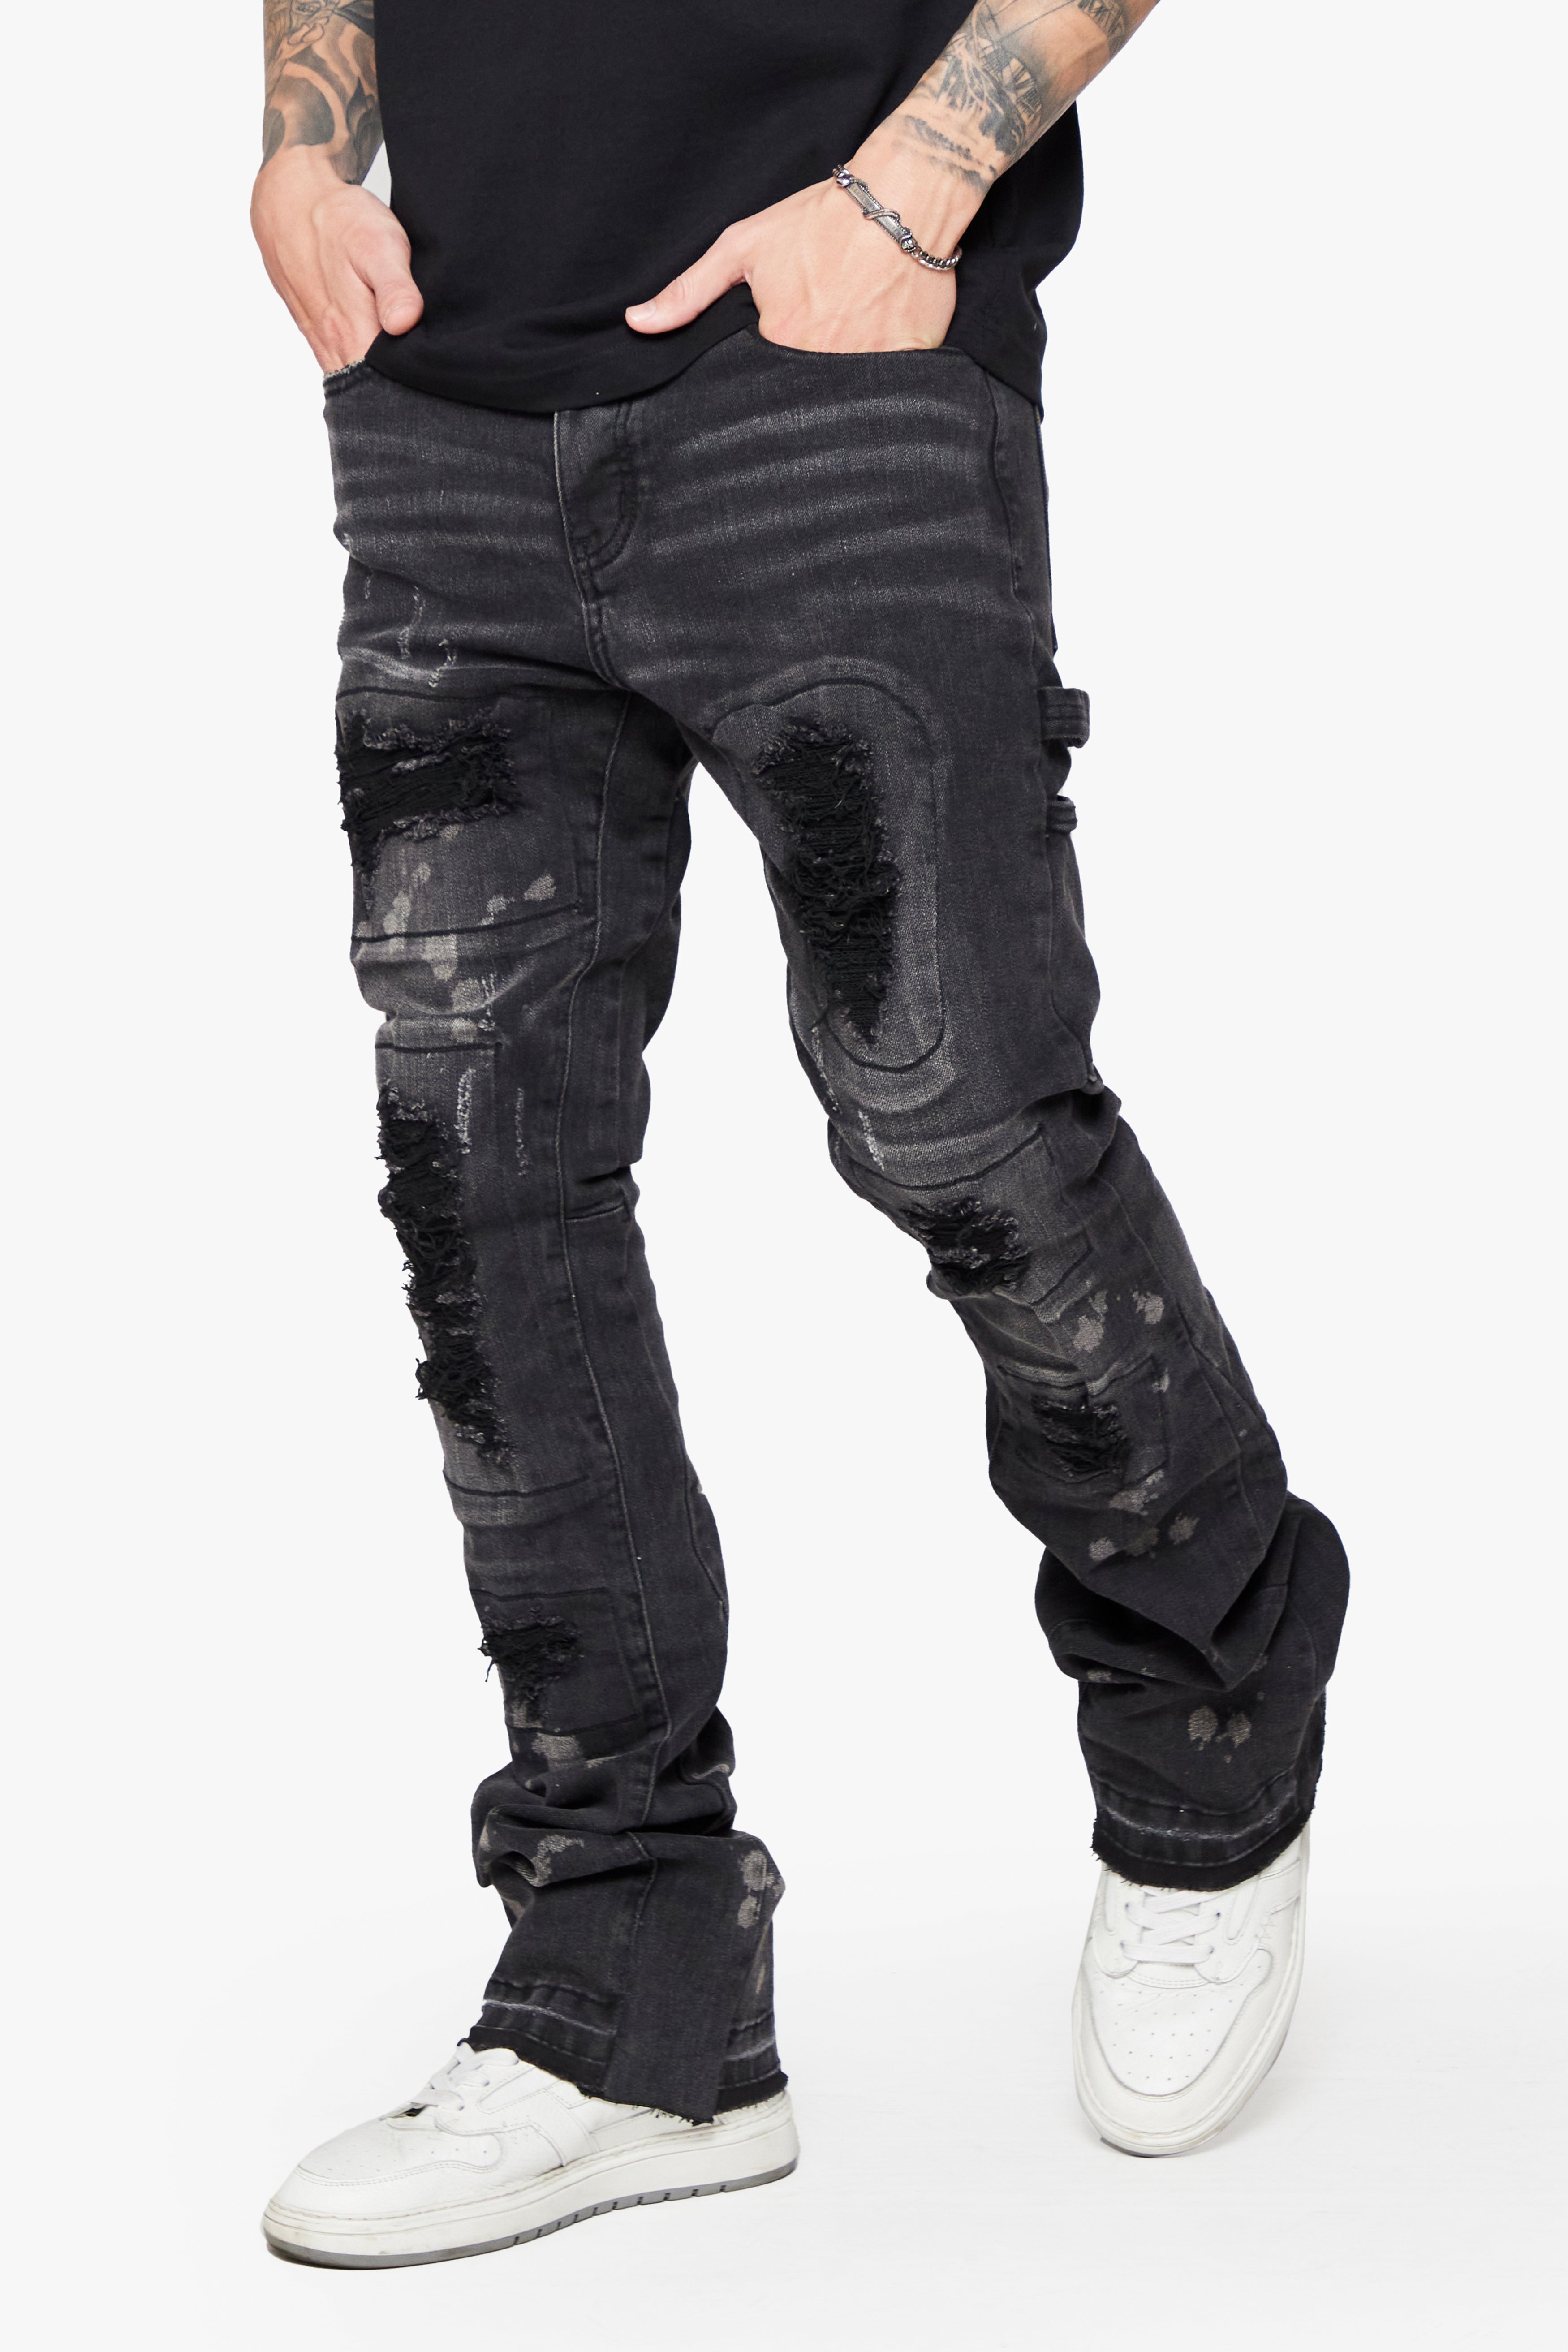 6thNBRHD STACKED "ASHES" -BLACK WASHED